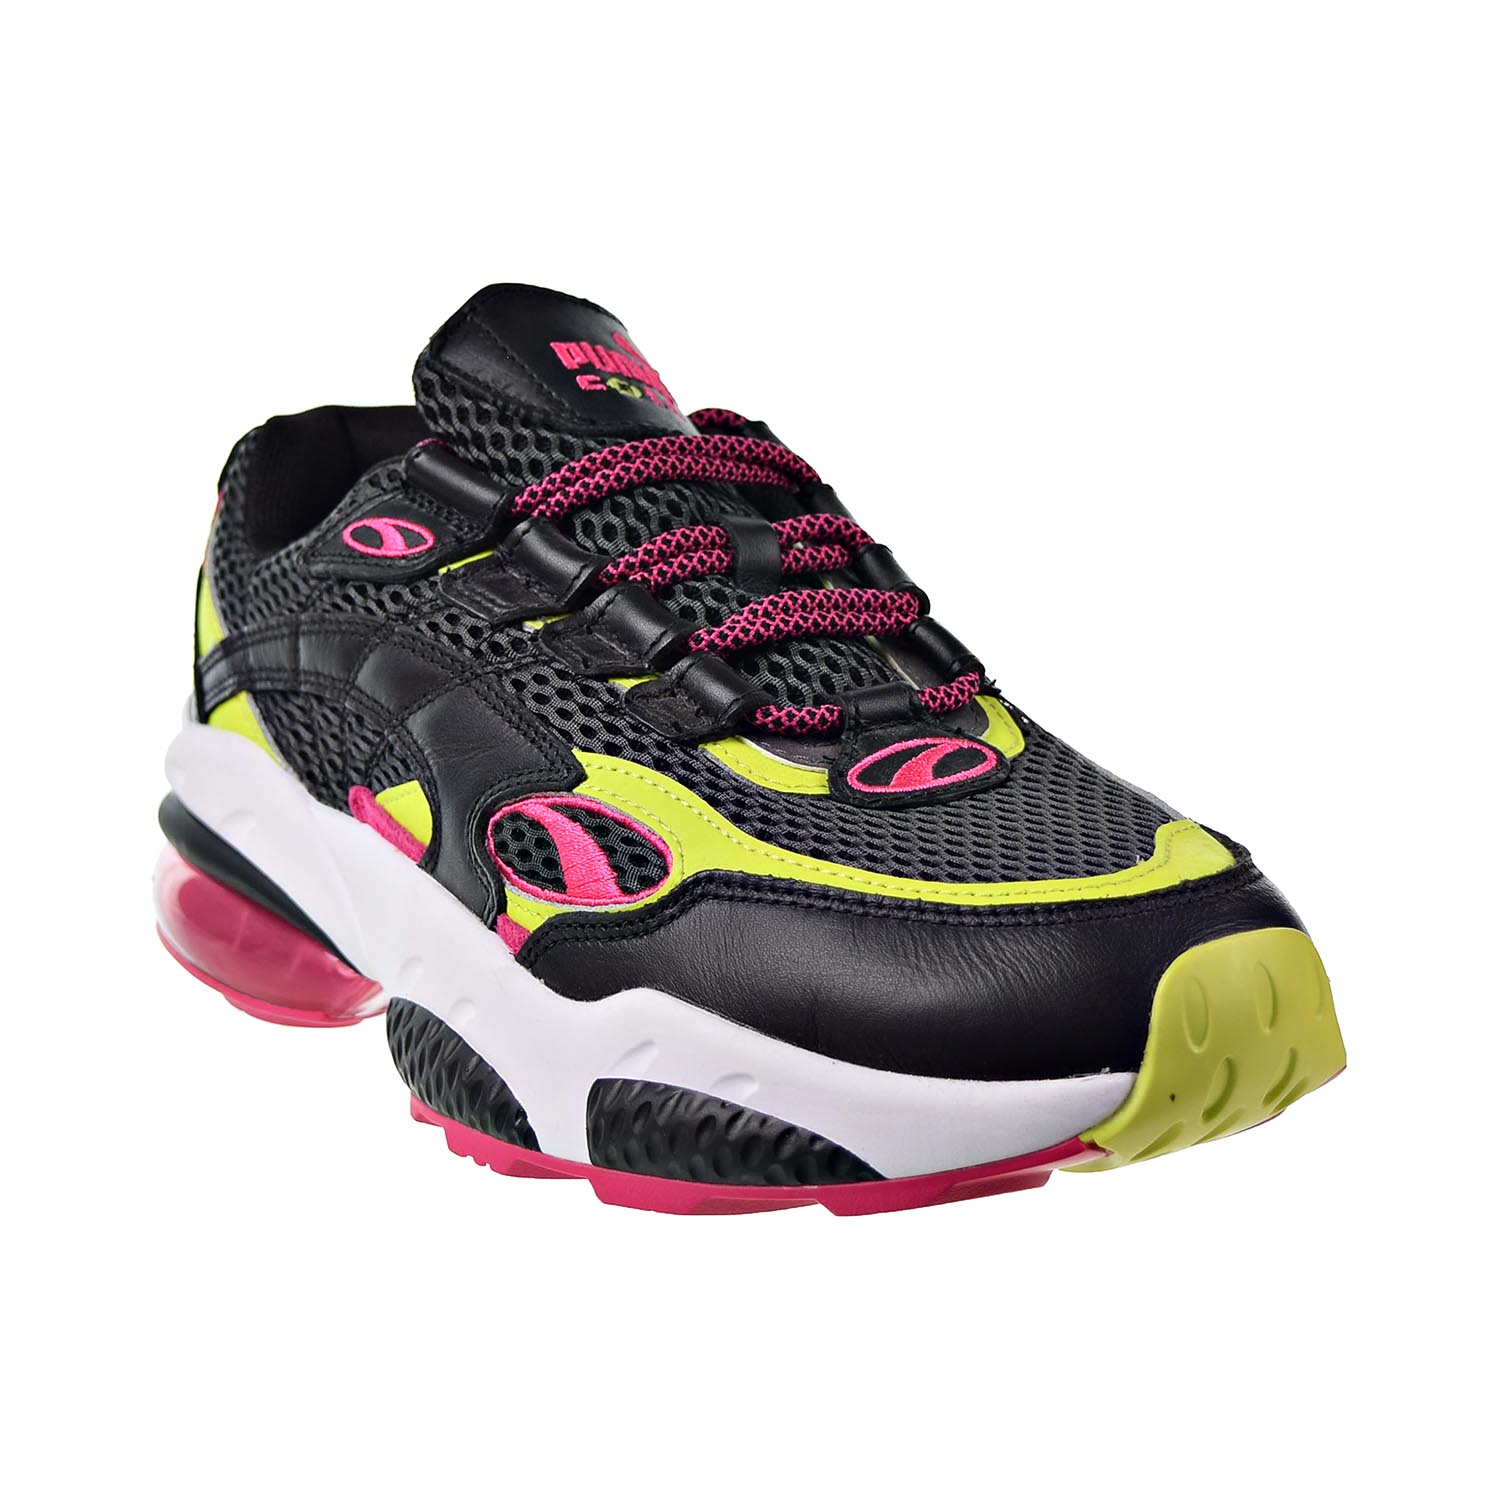 Puma Cell Venom 370417-01 Men Black/Pink/Lime Punch Athletic Running Shoes C1385 (11) - image 2 of 6